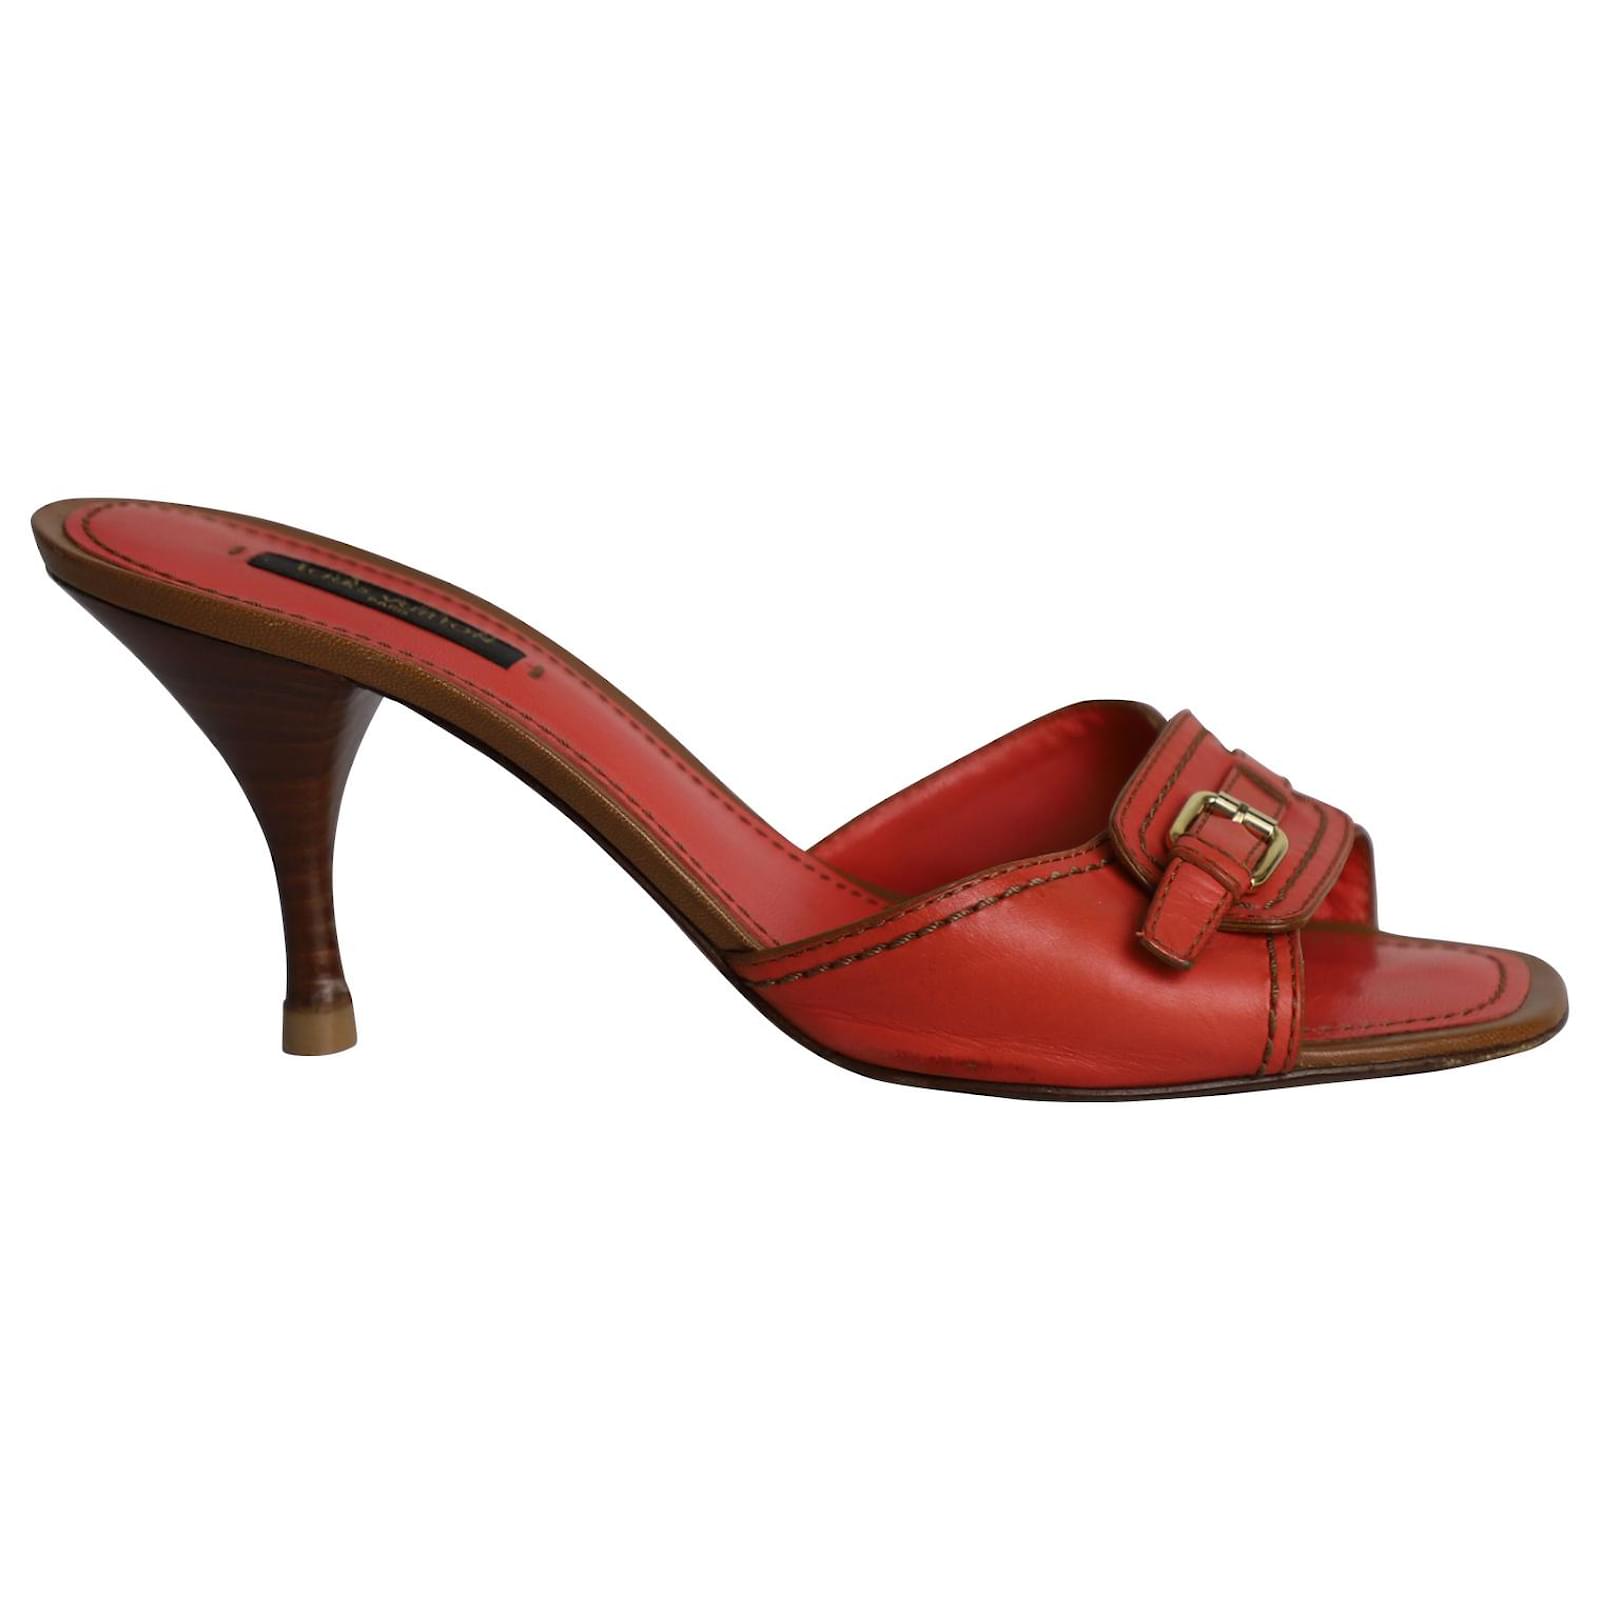 Louis Vuitton Red Patent Leather Eyeline Pumps Size 39